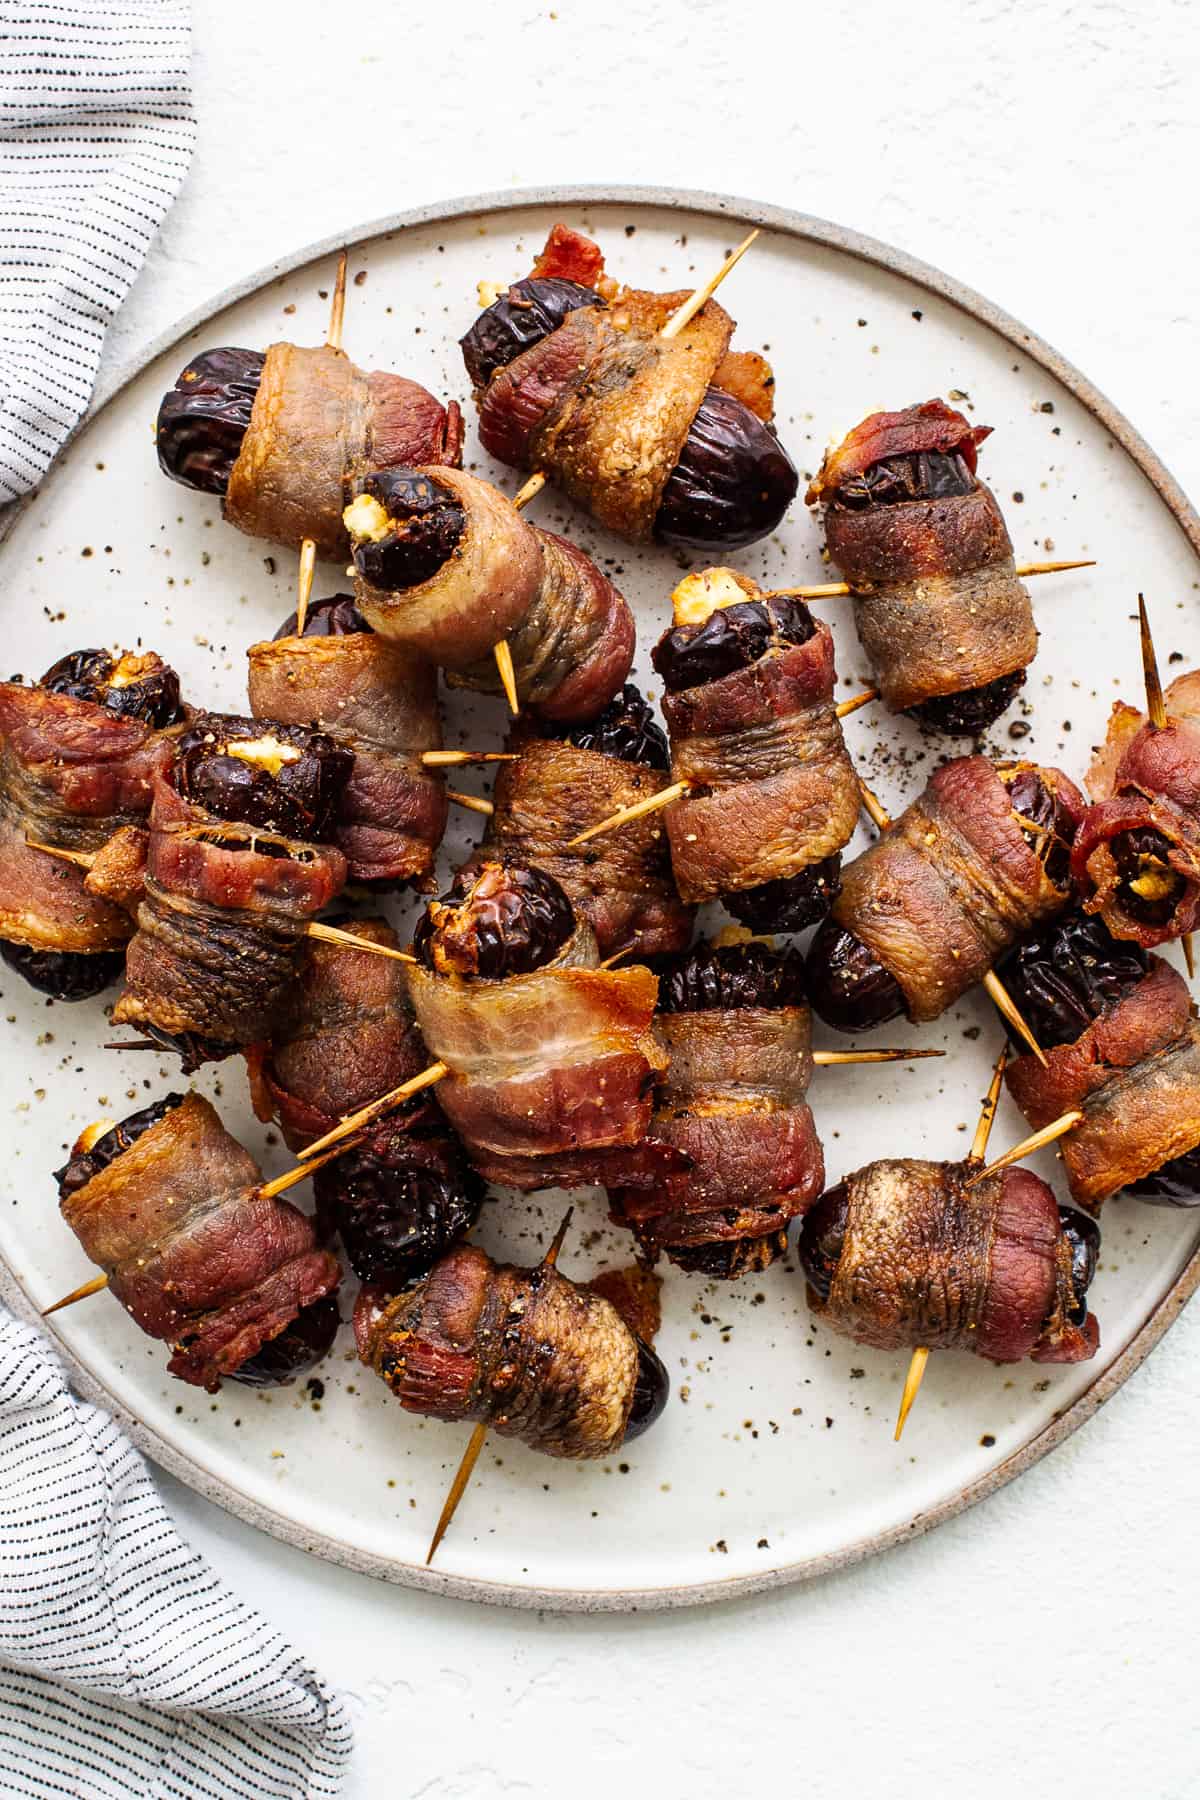 Bacon wrapped dates with goat cheese on a plate.